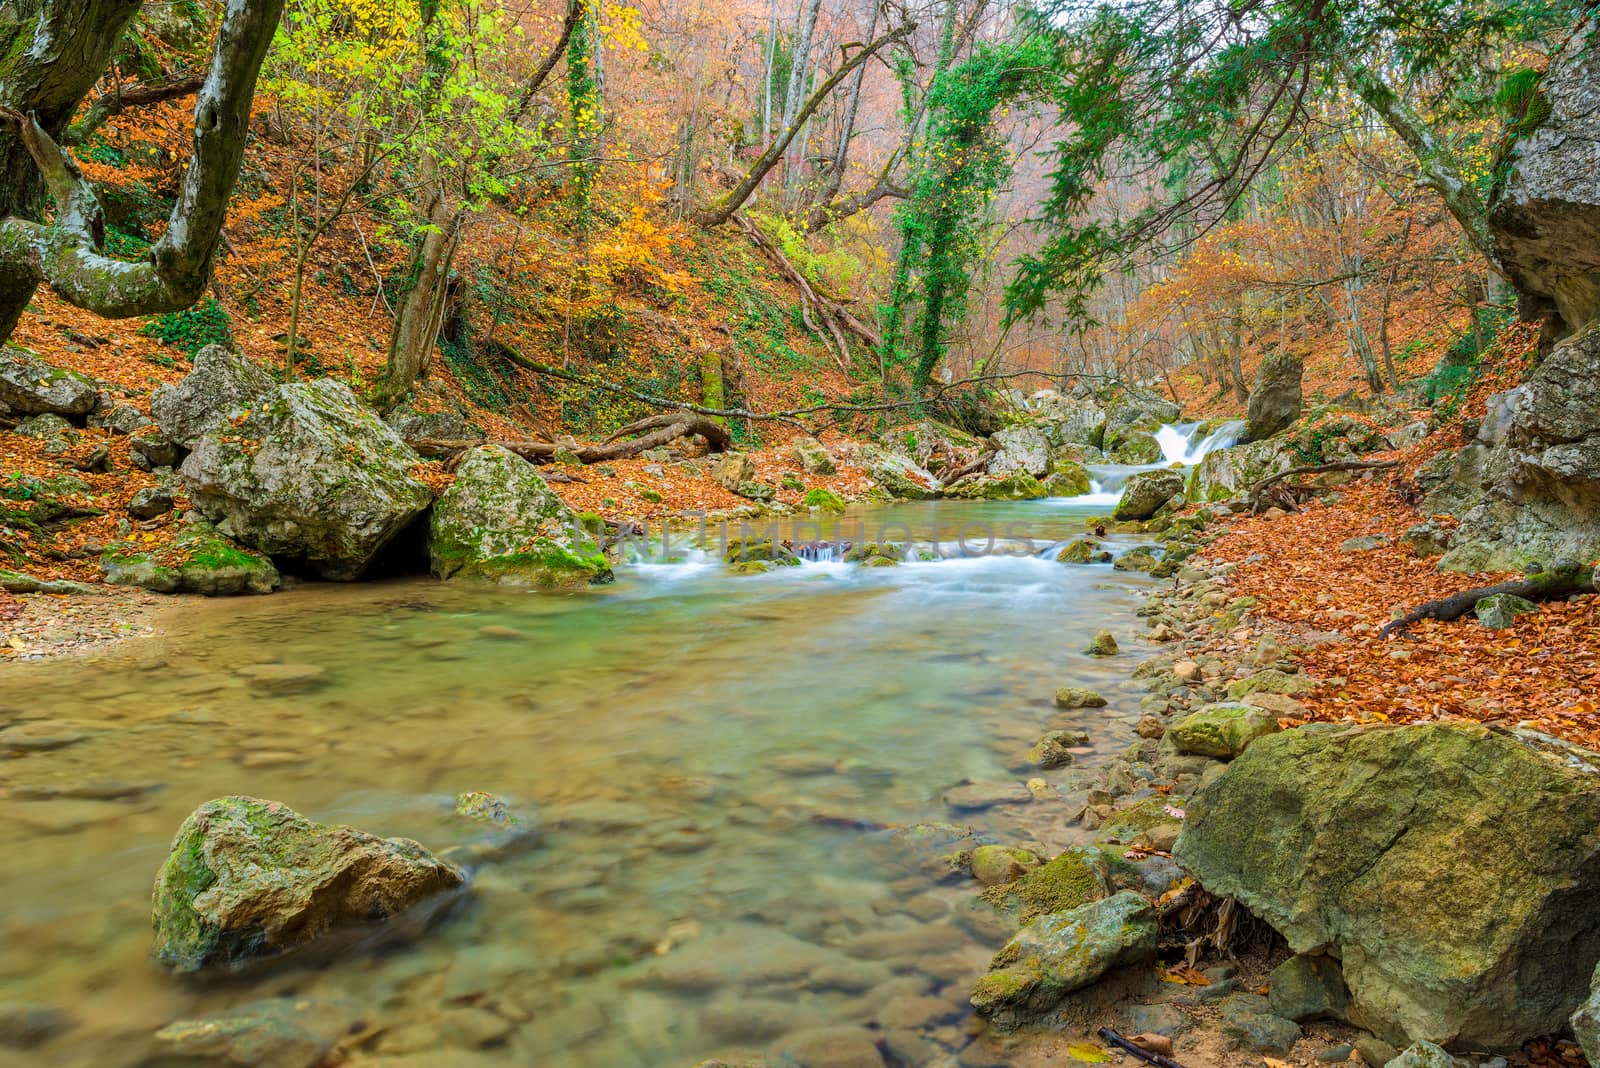 Beautiful autumn landscape, a river flowing into a gorge in the by kosmsos111